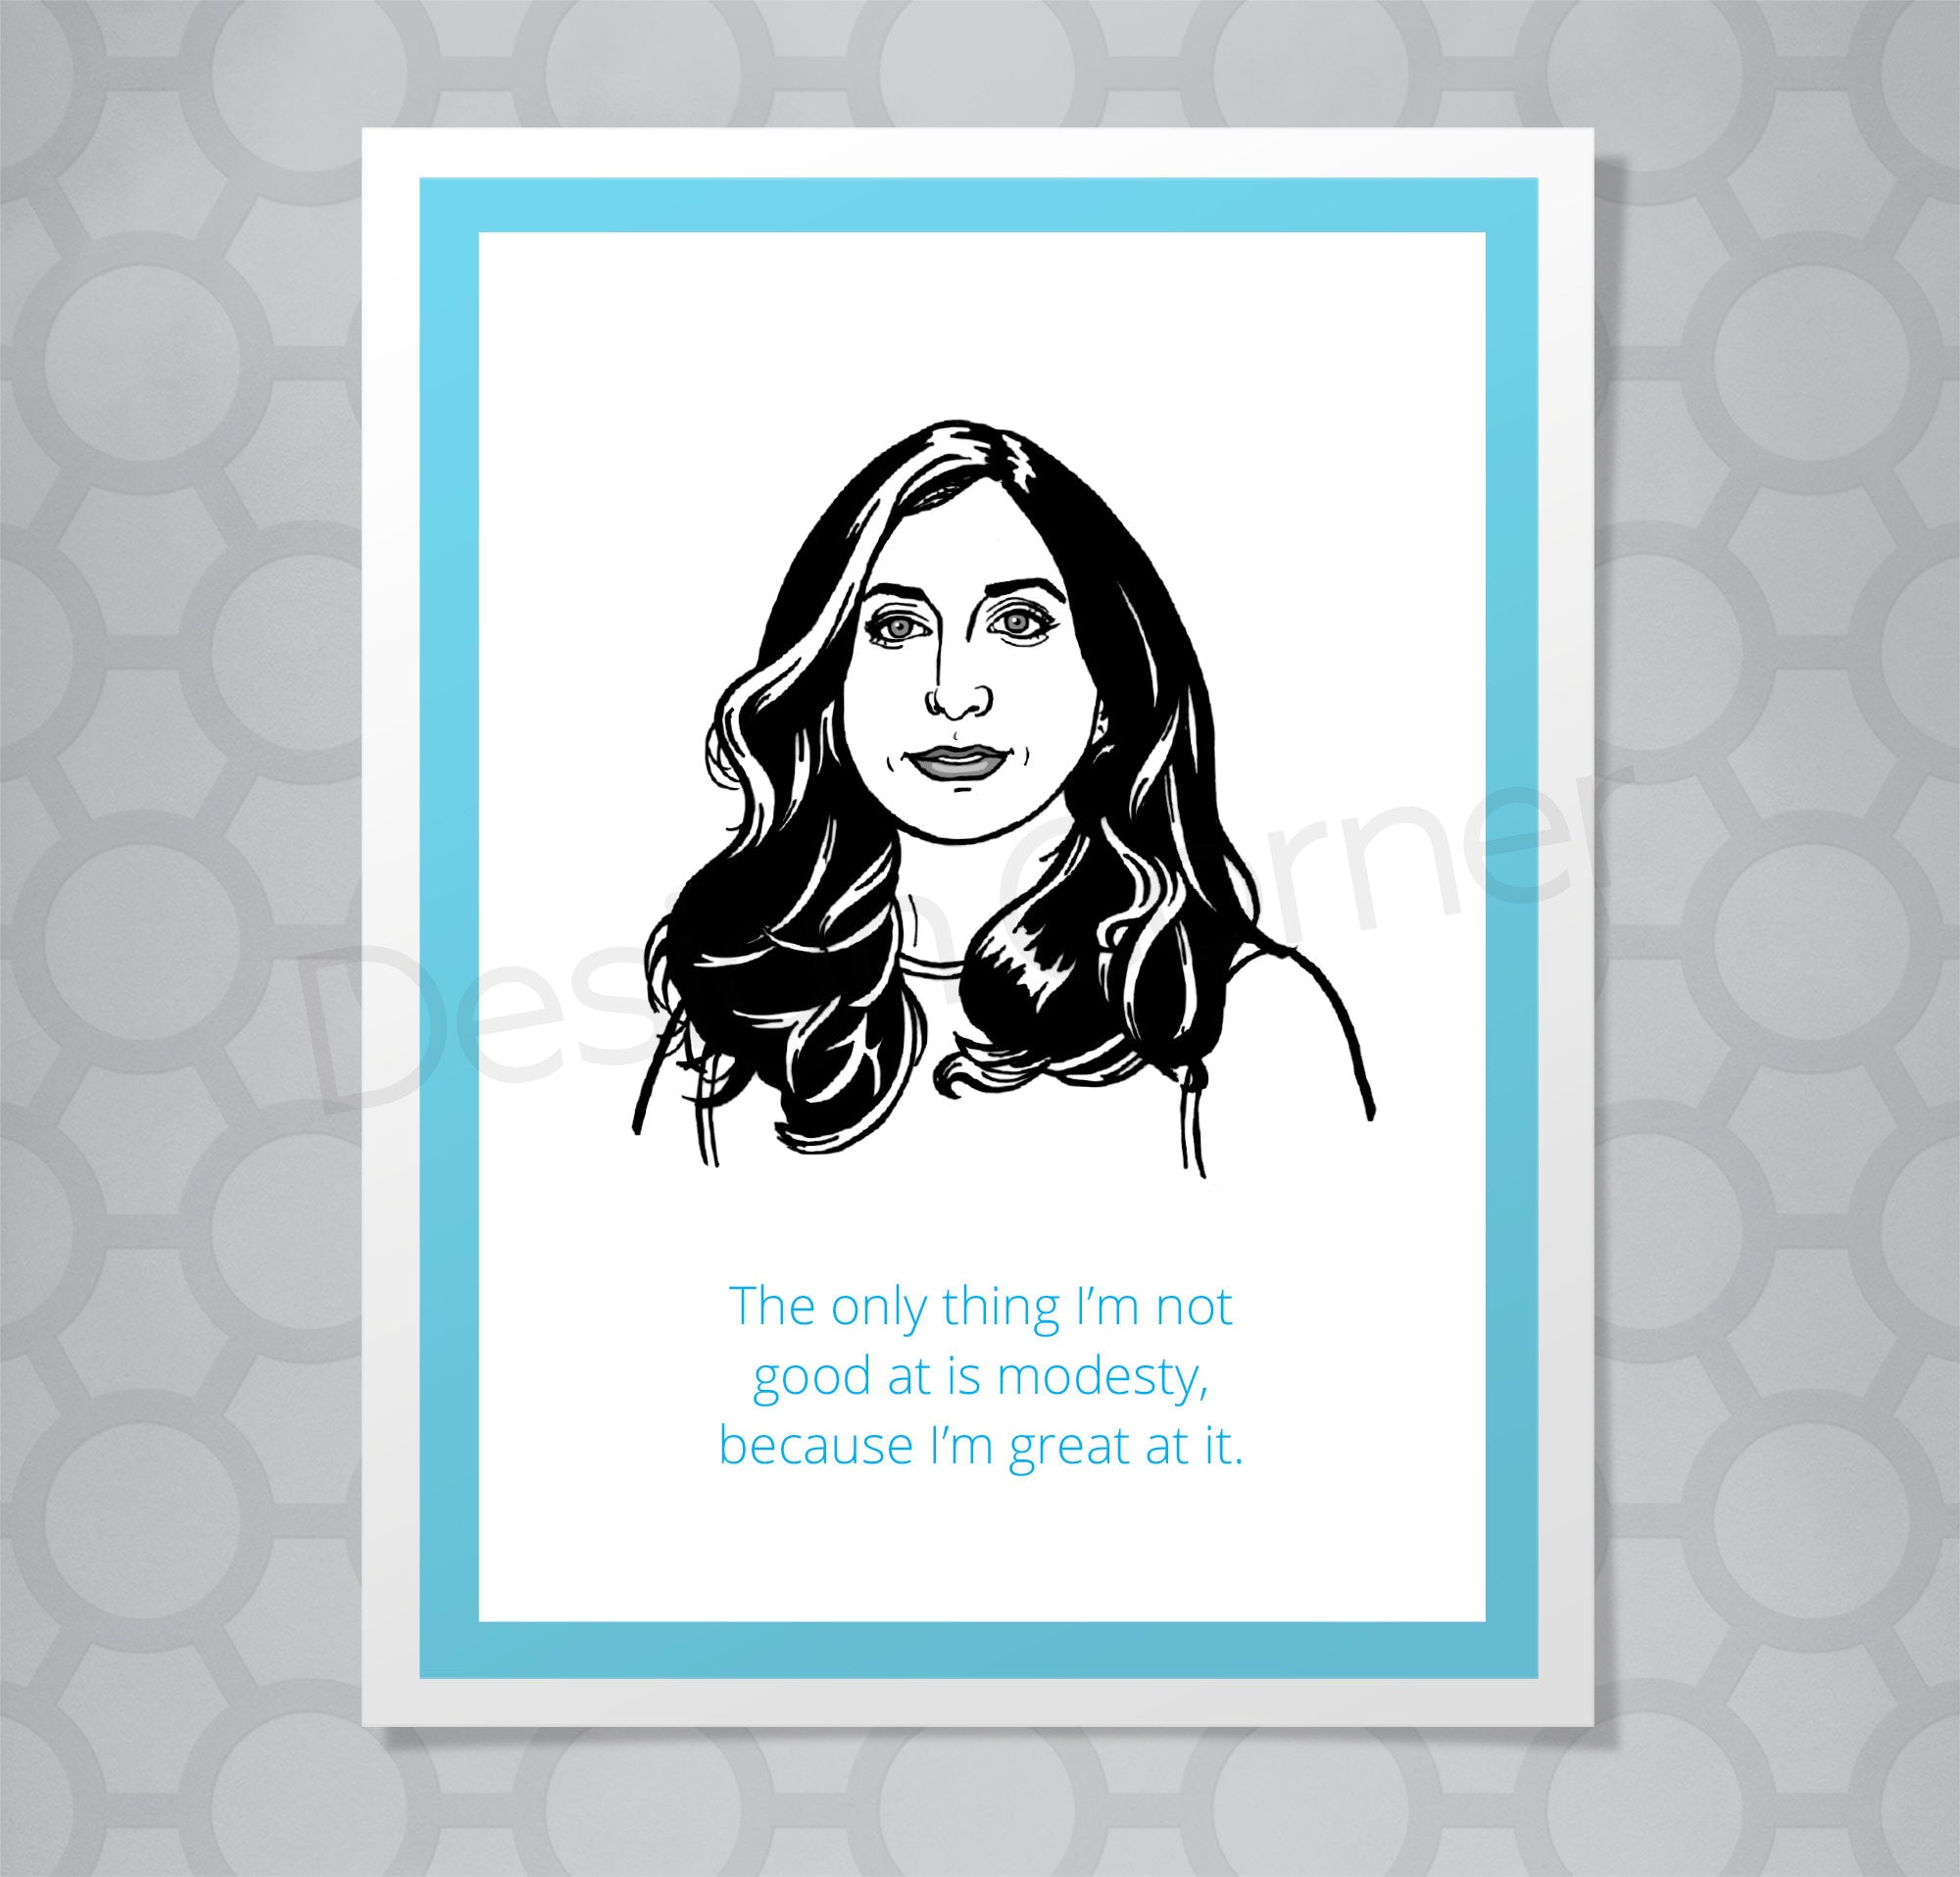 Greeting card with illustration of Brooklyn Nine Nine's Gina. Caption says "The only thing I'm not good at is modesty because I'm great at it."